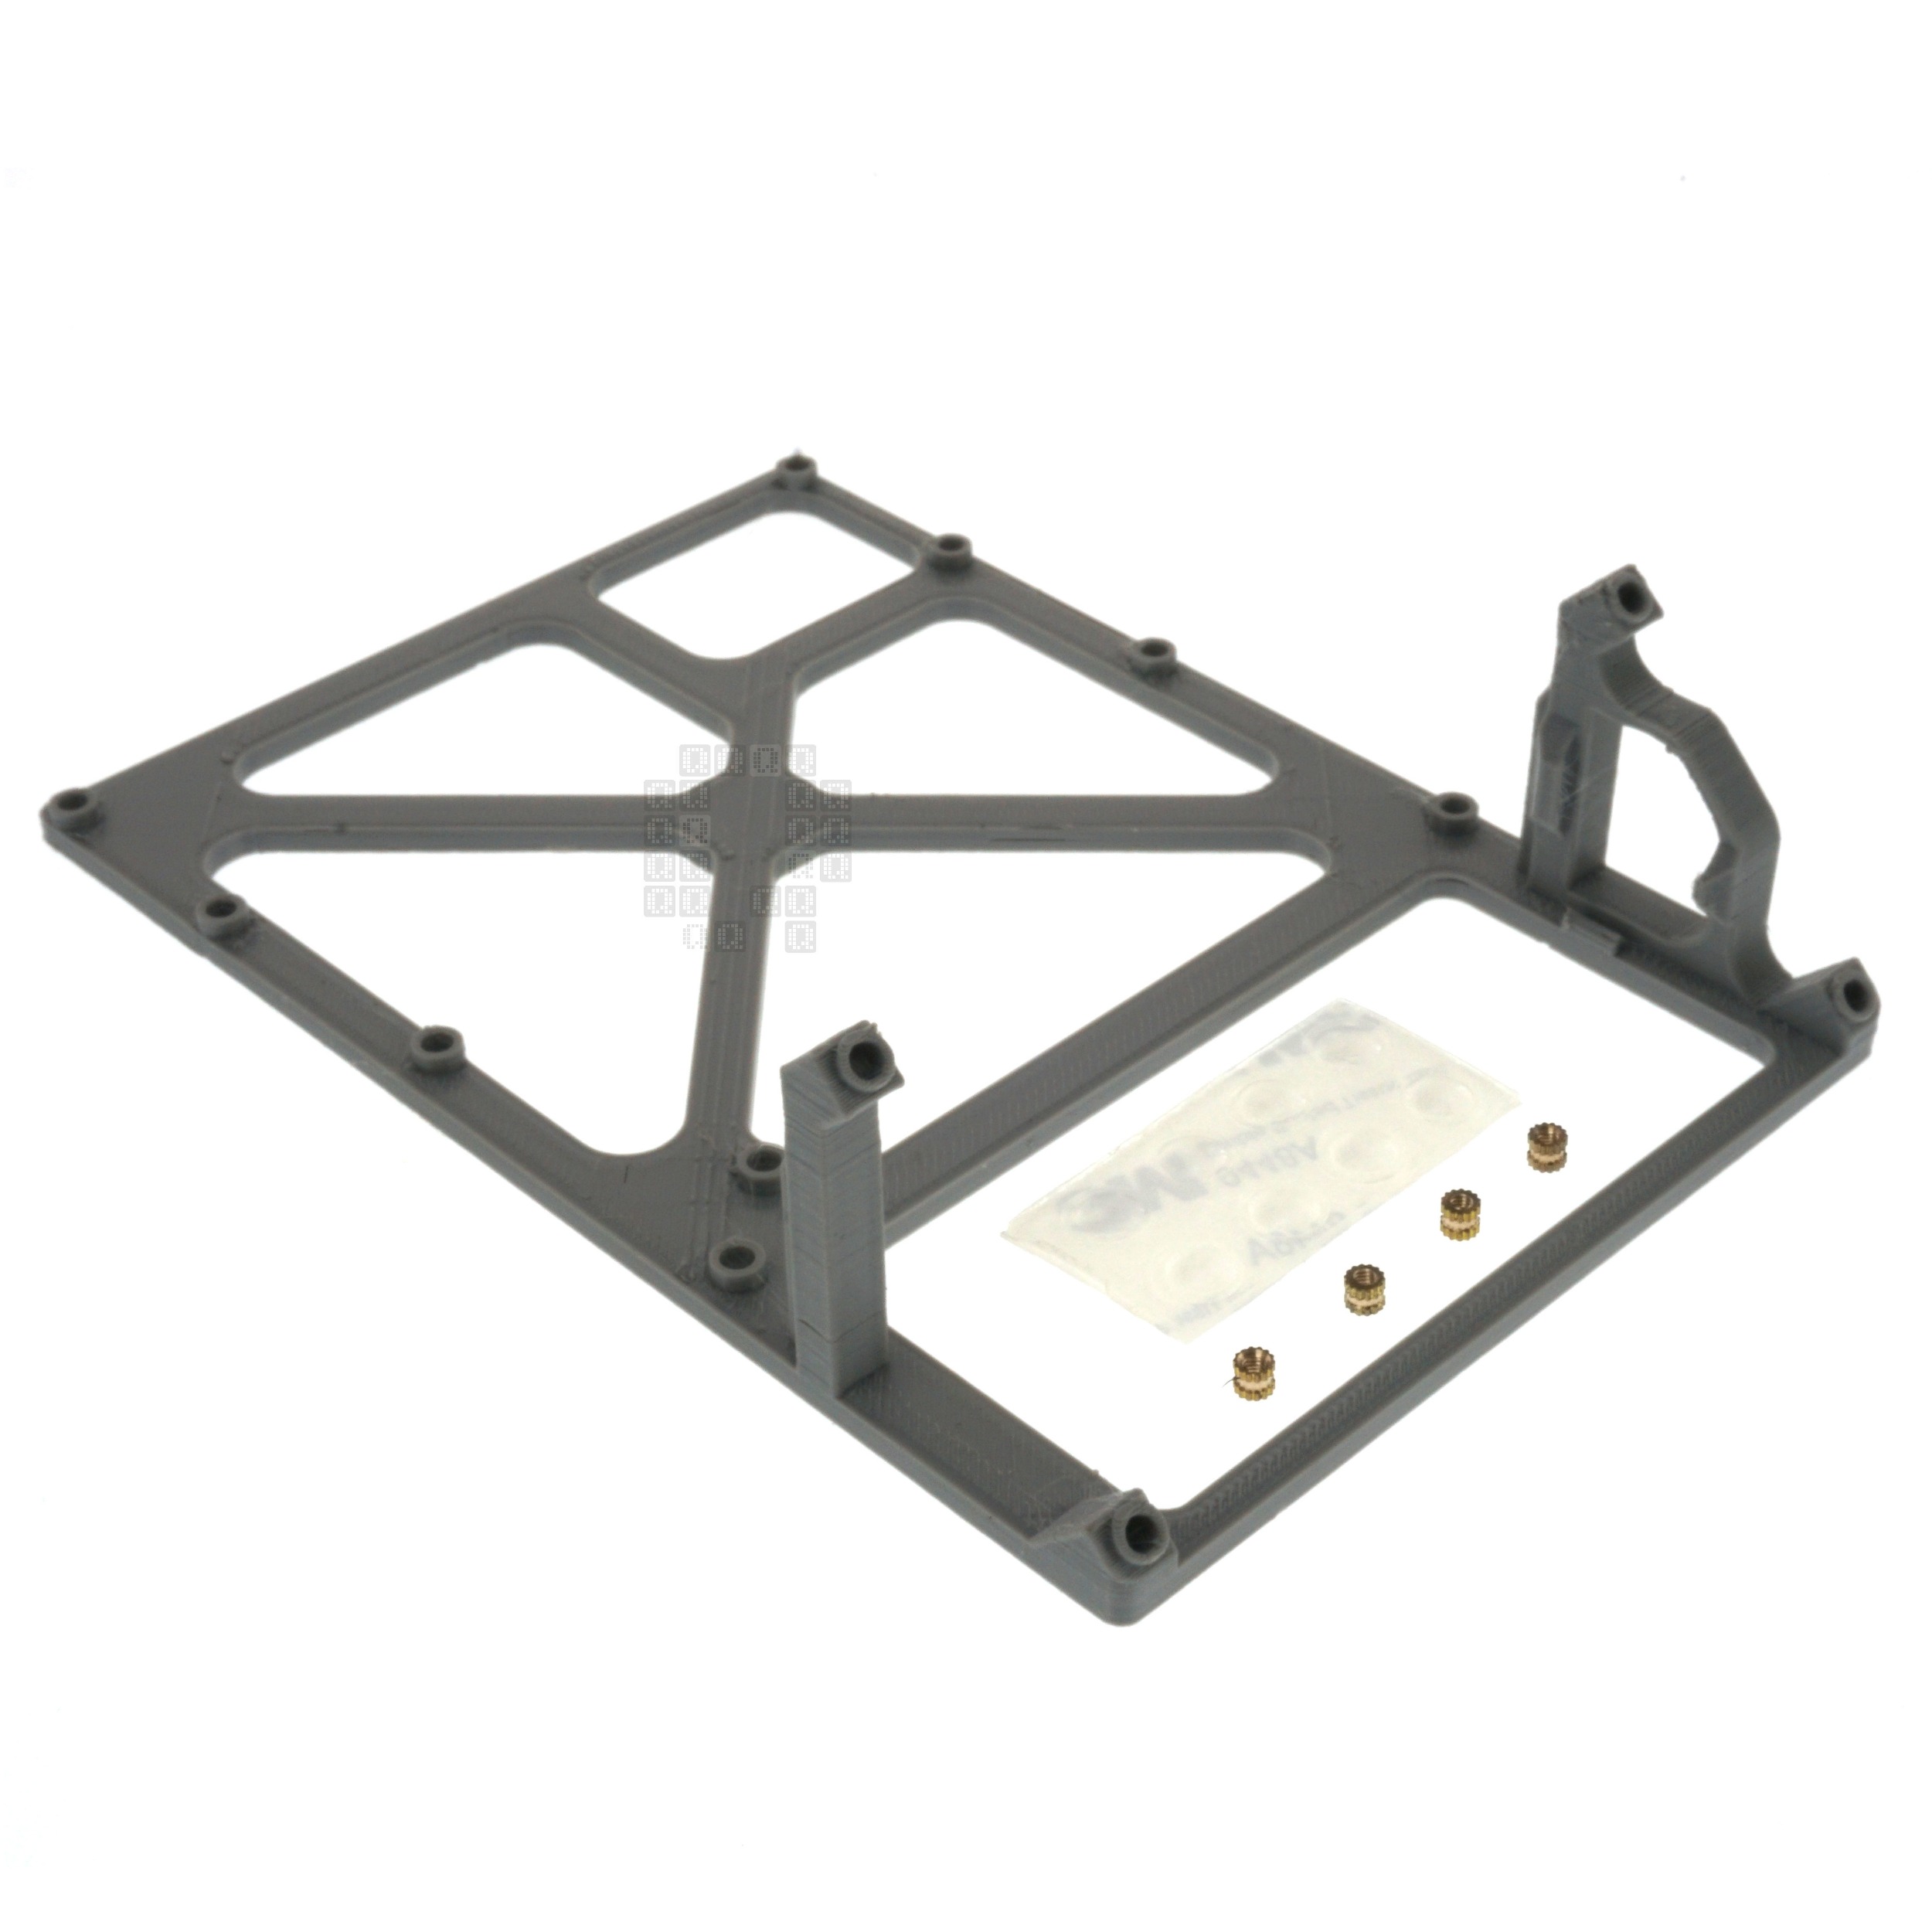  Sanni Open Source Cart Reader HW5 Main PCB Stand Frame with Battery Cutout, Gray